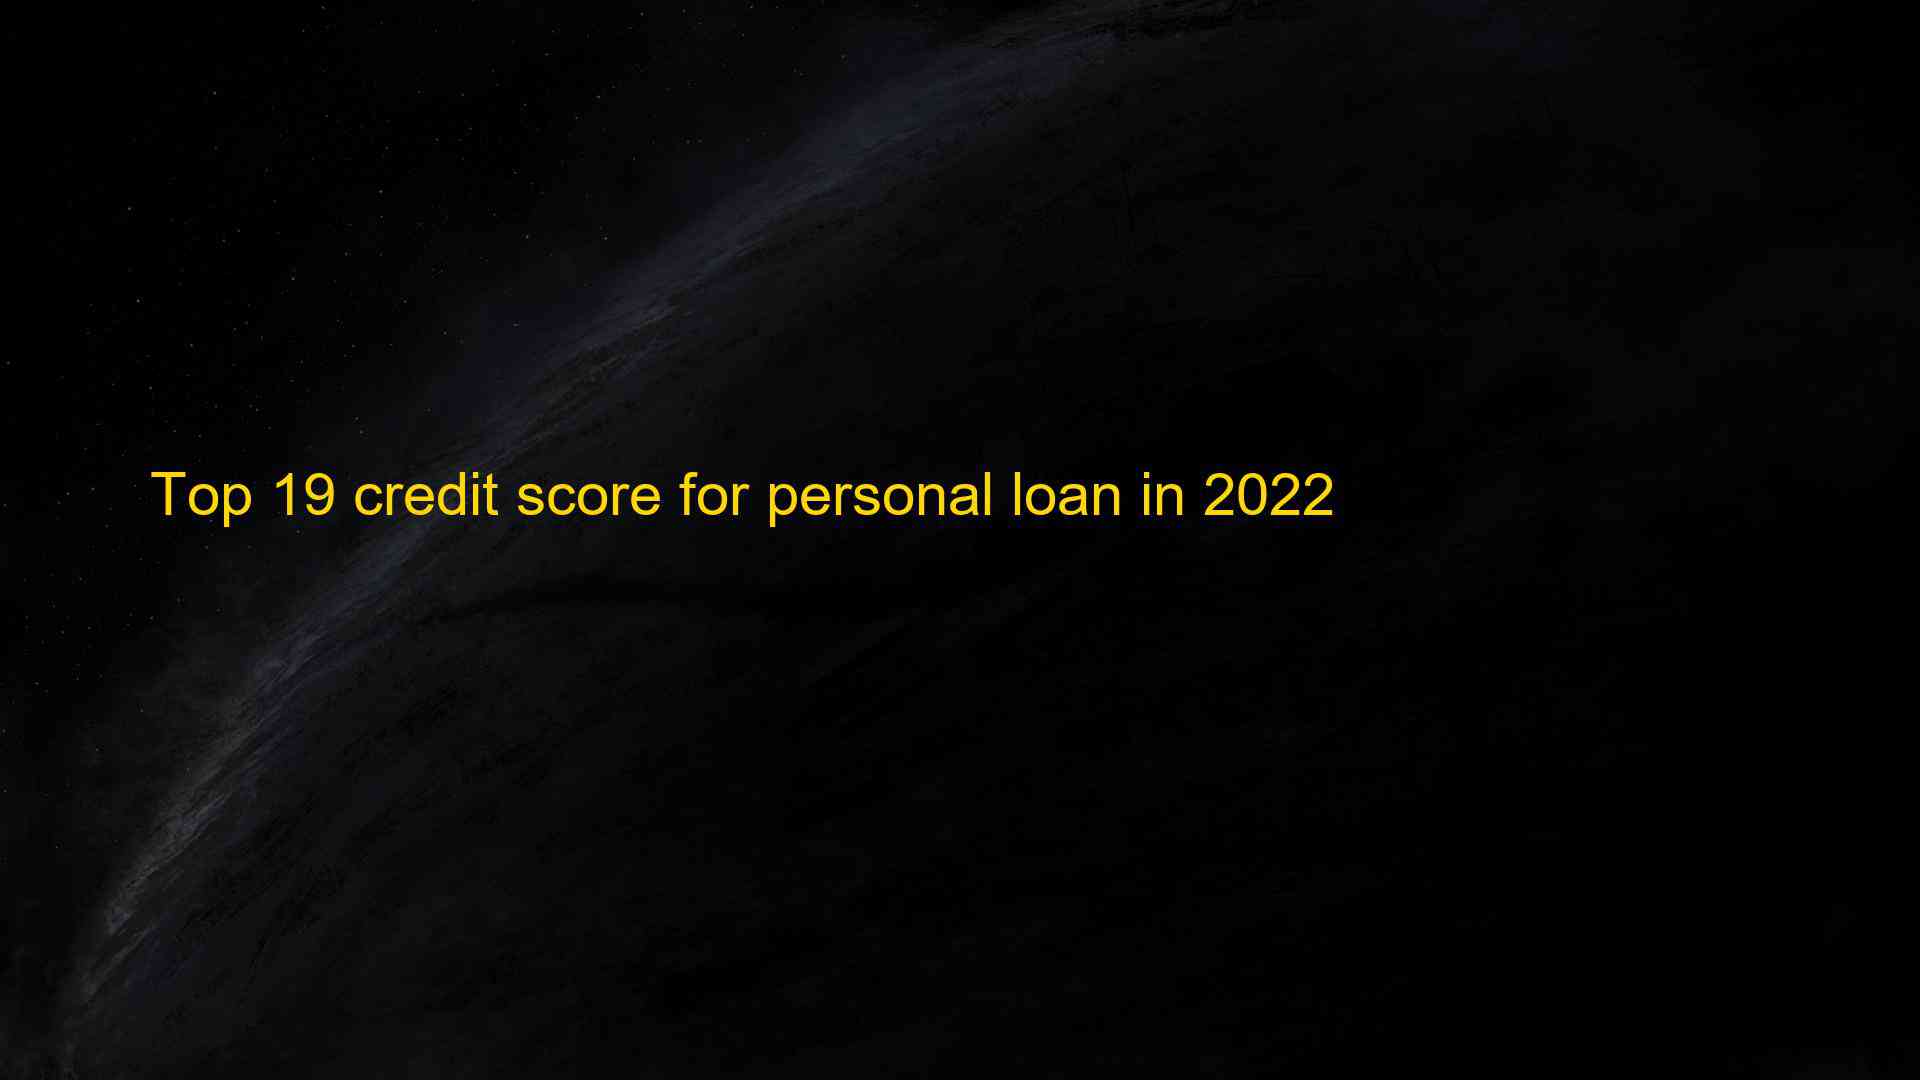 Top 19 credit score for personal loan in 2022 1660195978